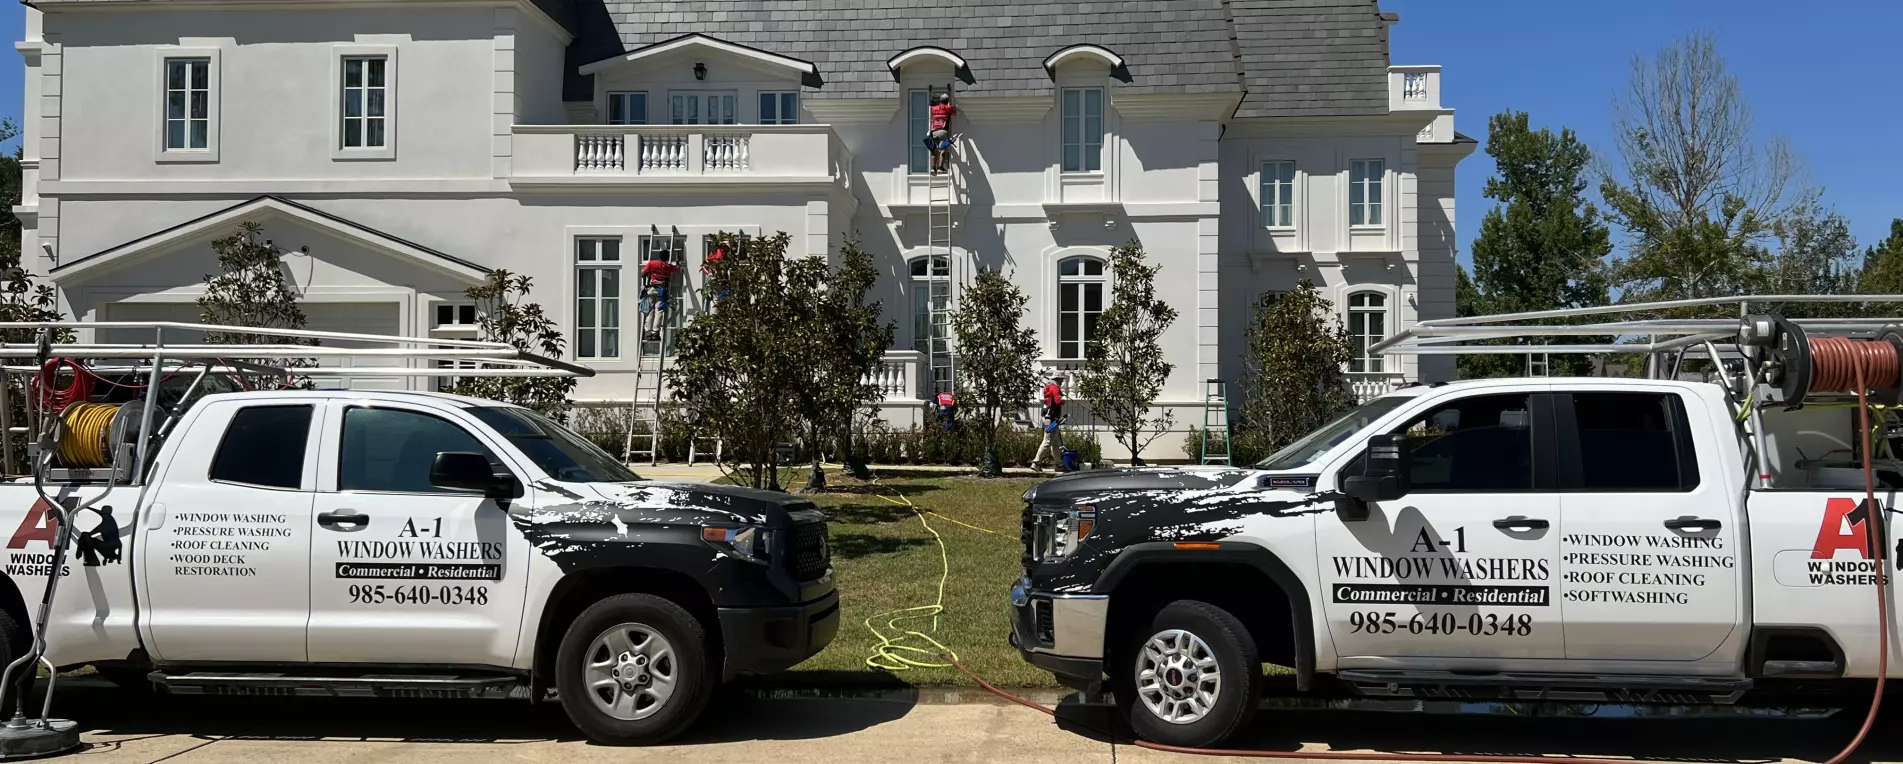 Two A-1 Window washer trucks in front of a house cleaning